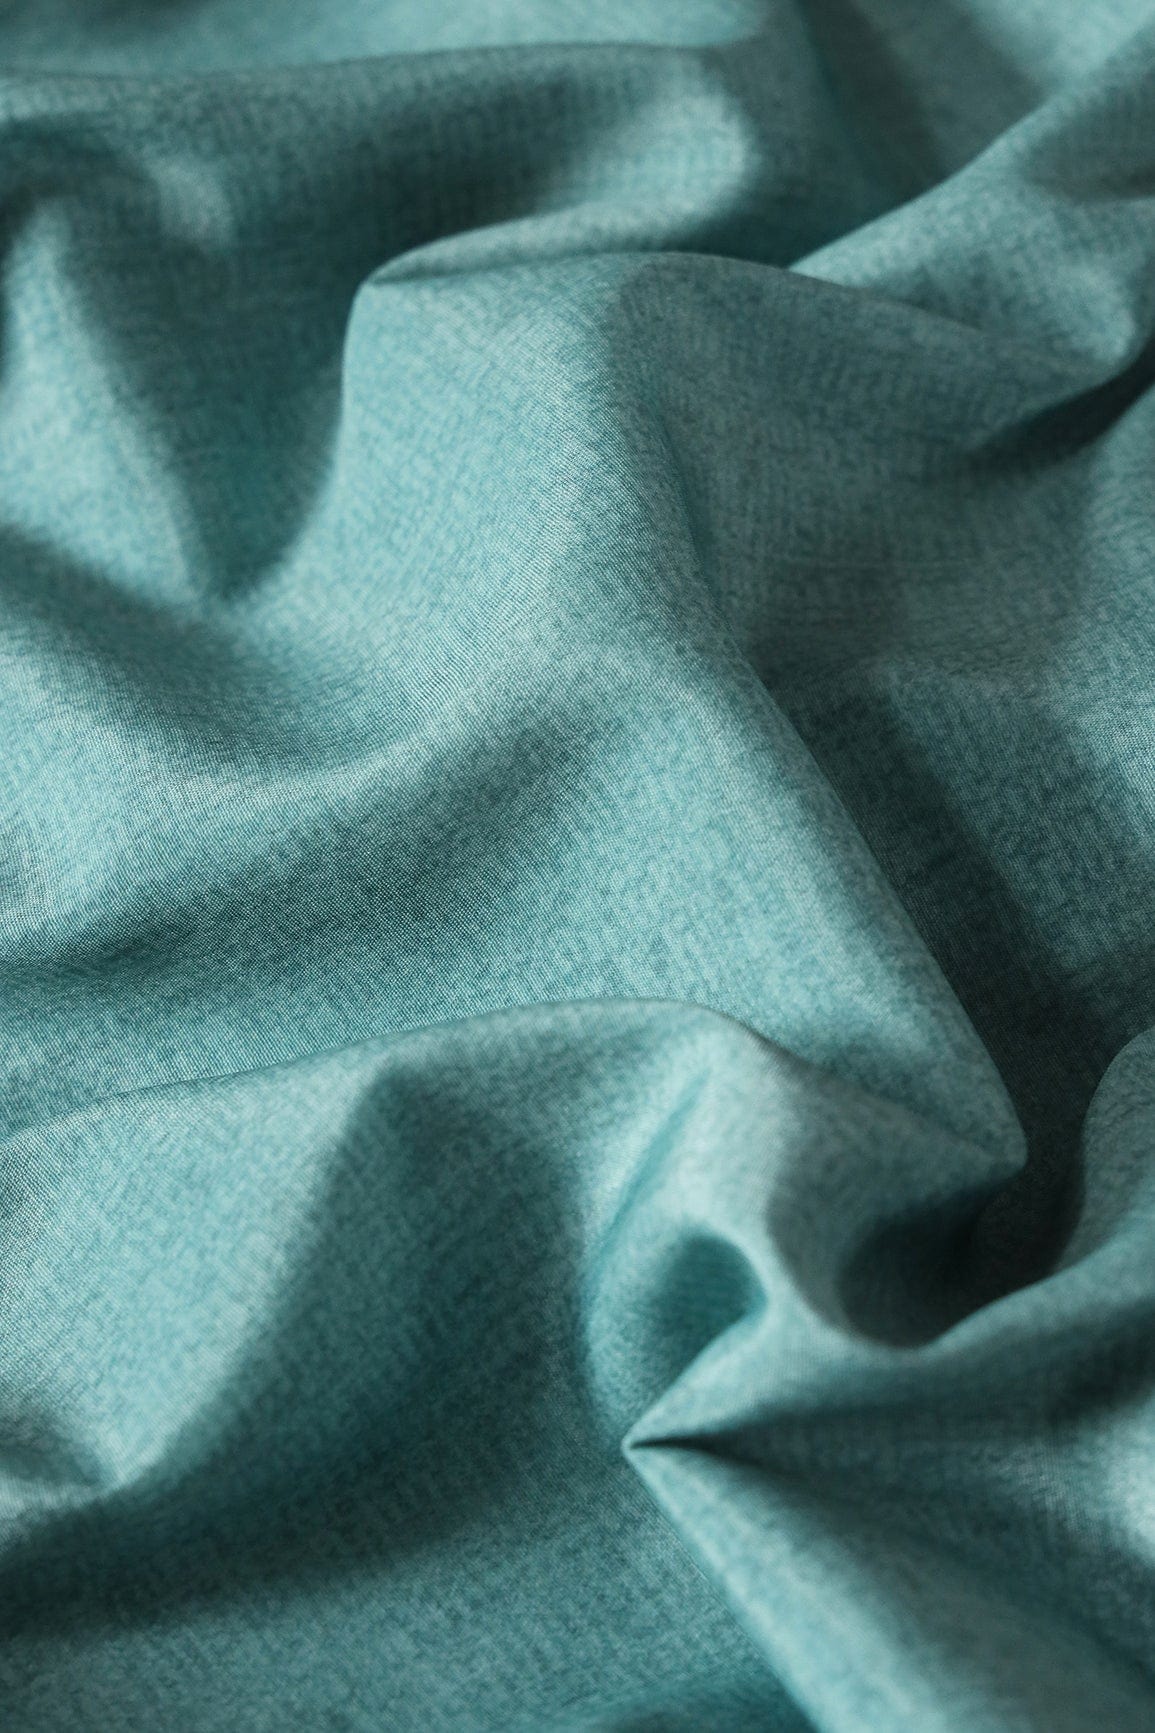 Pastel Teal Texture Pattern Digital Print On French Crepe Fabric - doeraa